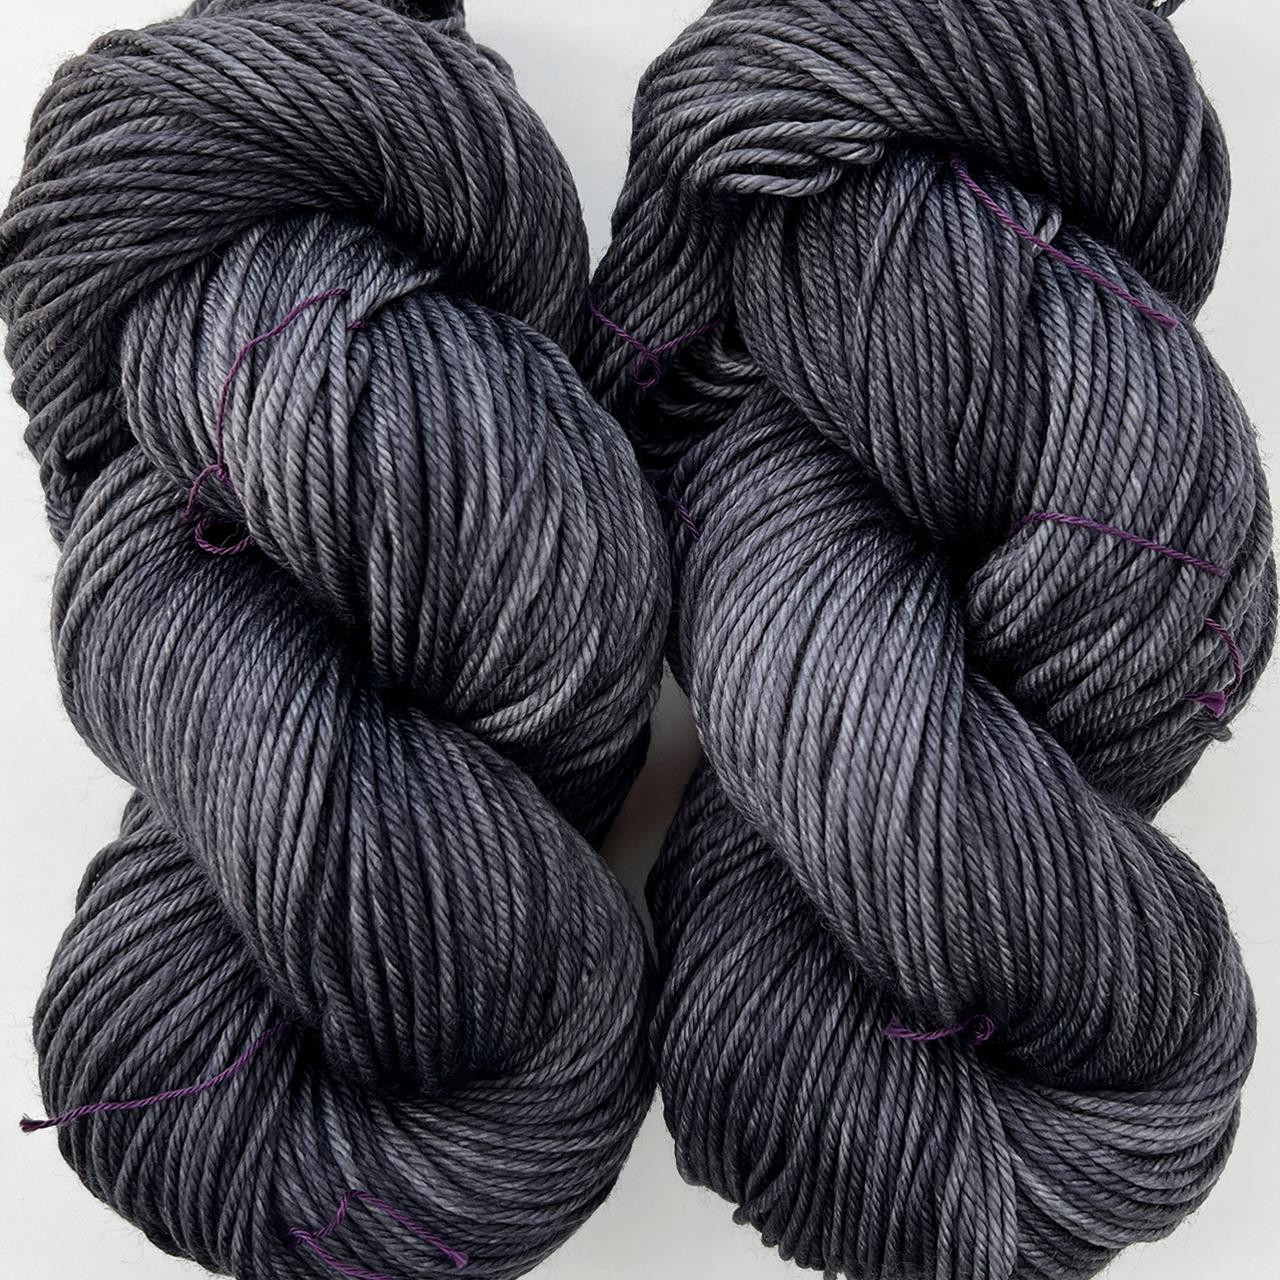 MT Tosh DK Dirty Panther -